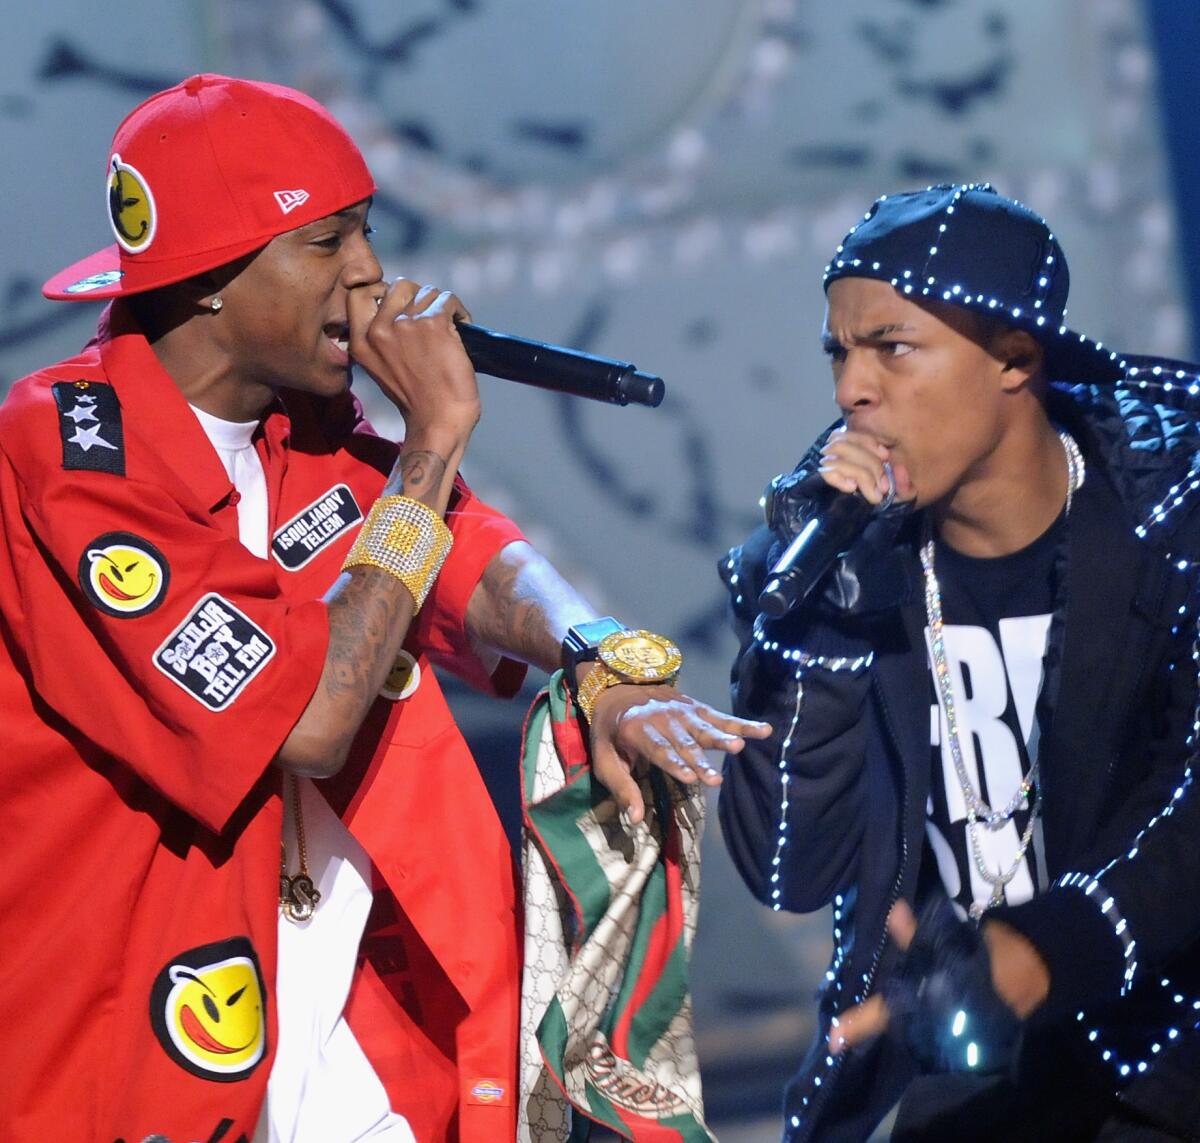 Two men rap side by side at a live event.